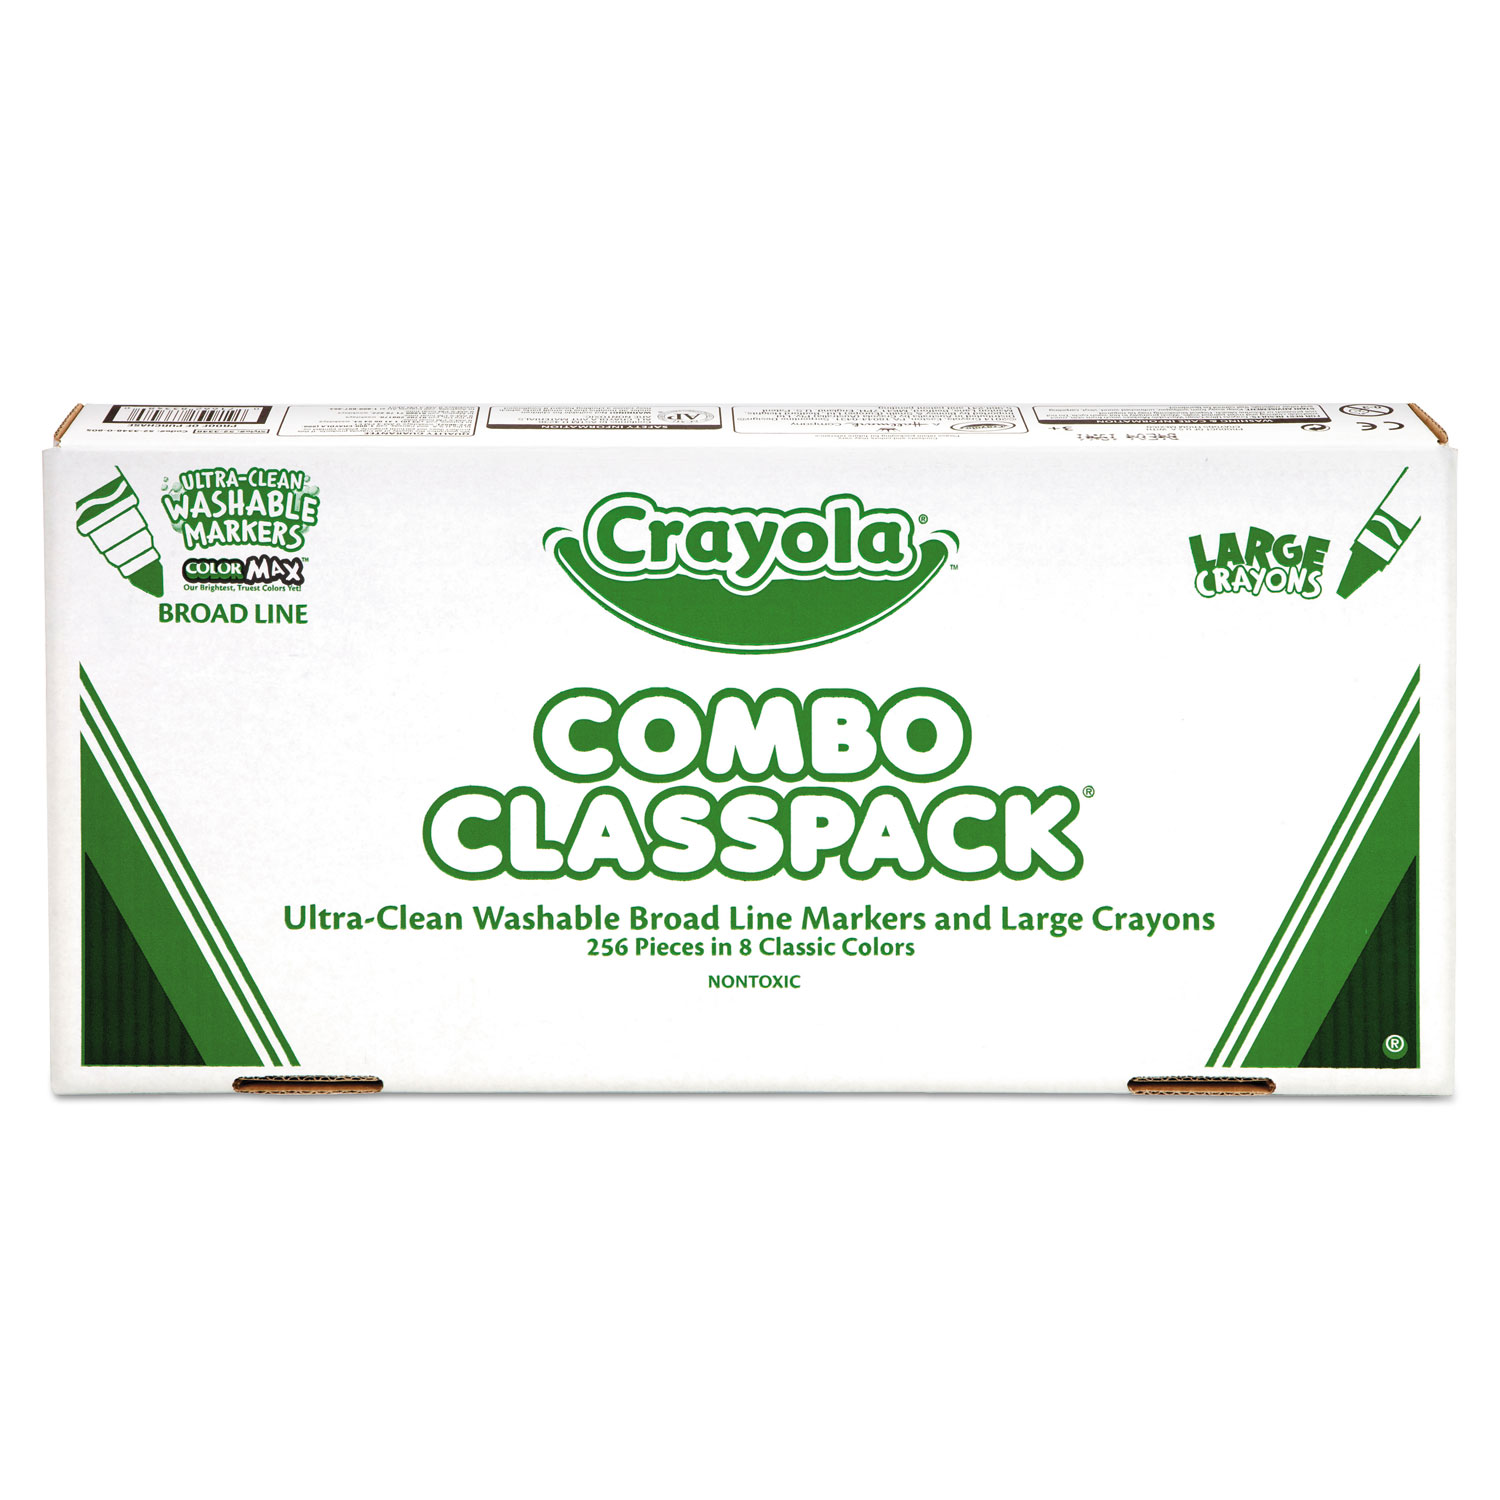 Crayola 24 Count Ultra-Clean Washable Markers ColorMAX Broadline